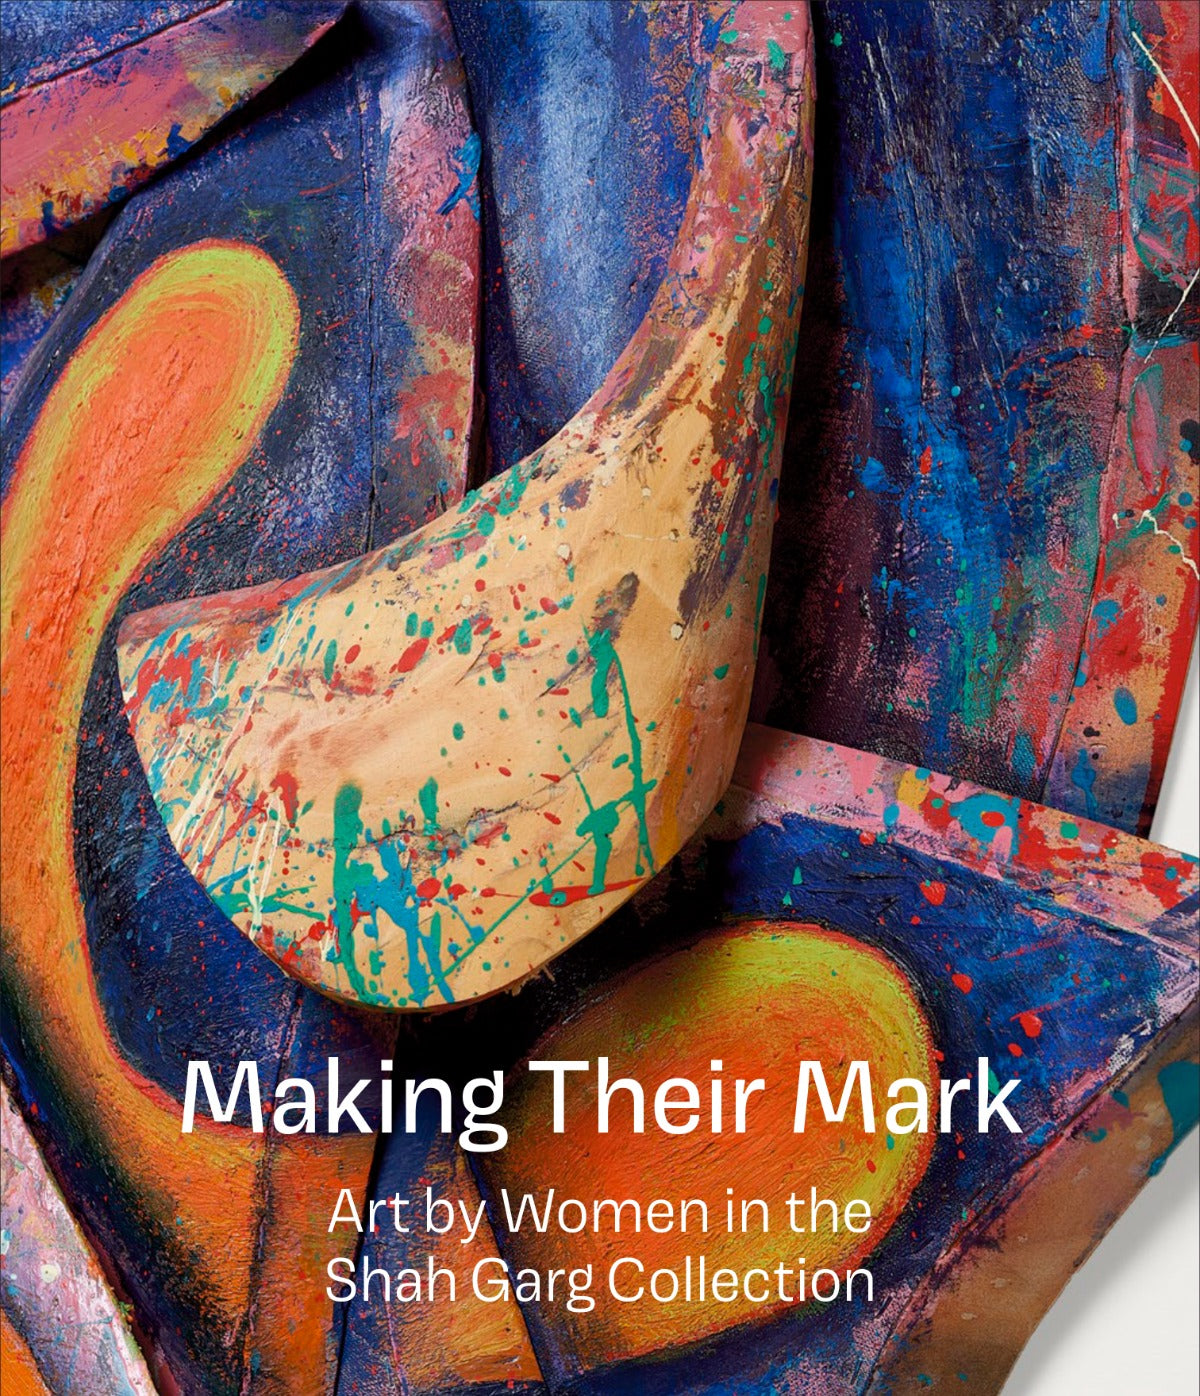 Recommended Reading: Making Their Mark | Art by Women in the Shah Garg Collection